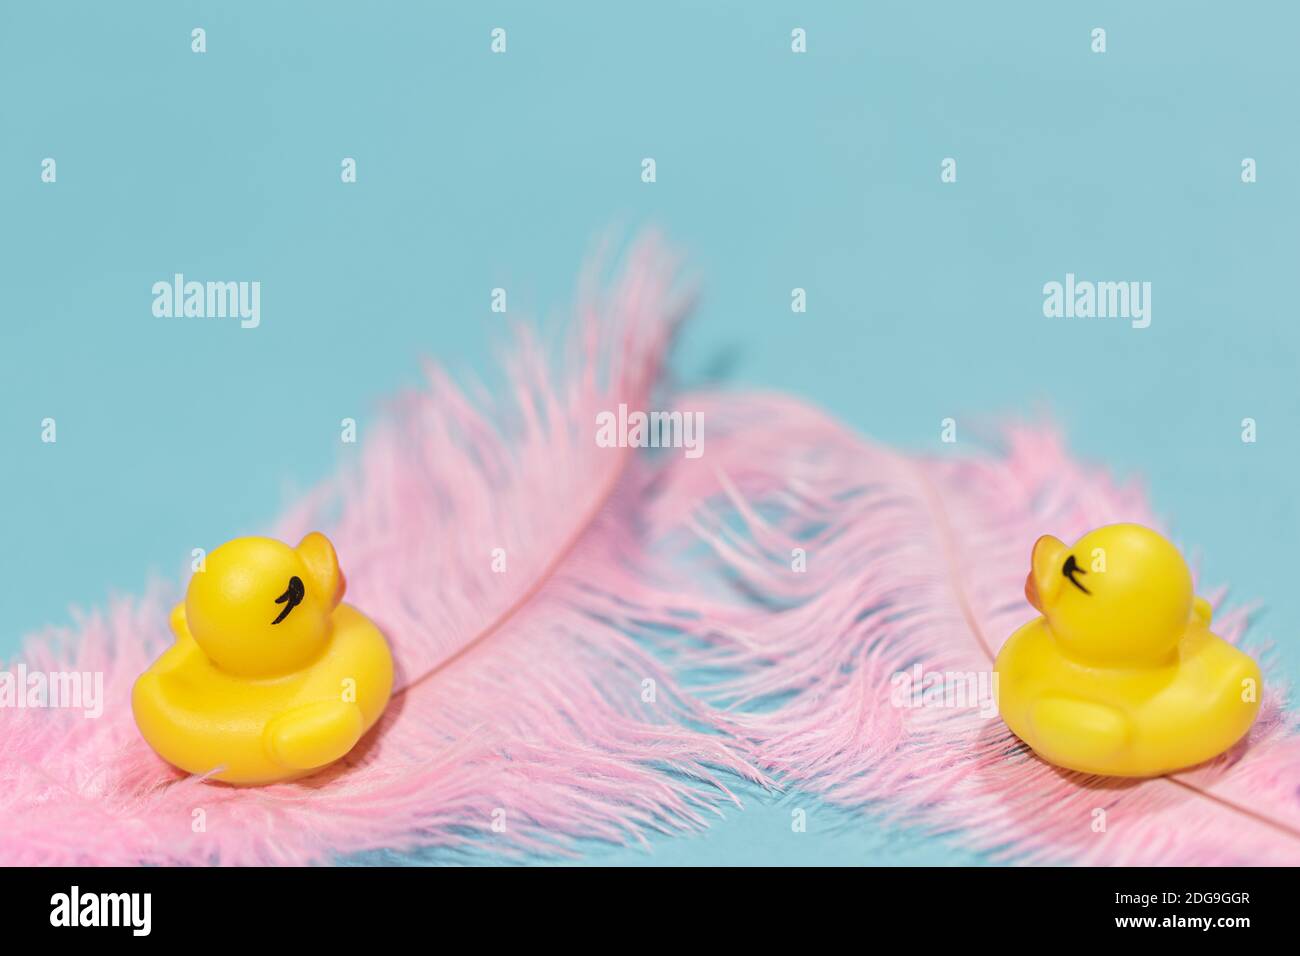 Two small yellow rubber ducks on soft pink feathers on a blue background Stock Photo